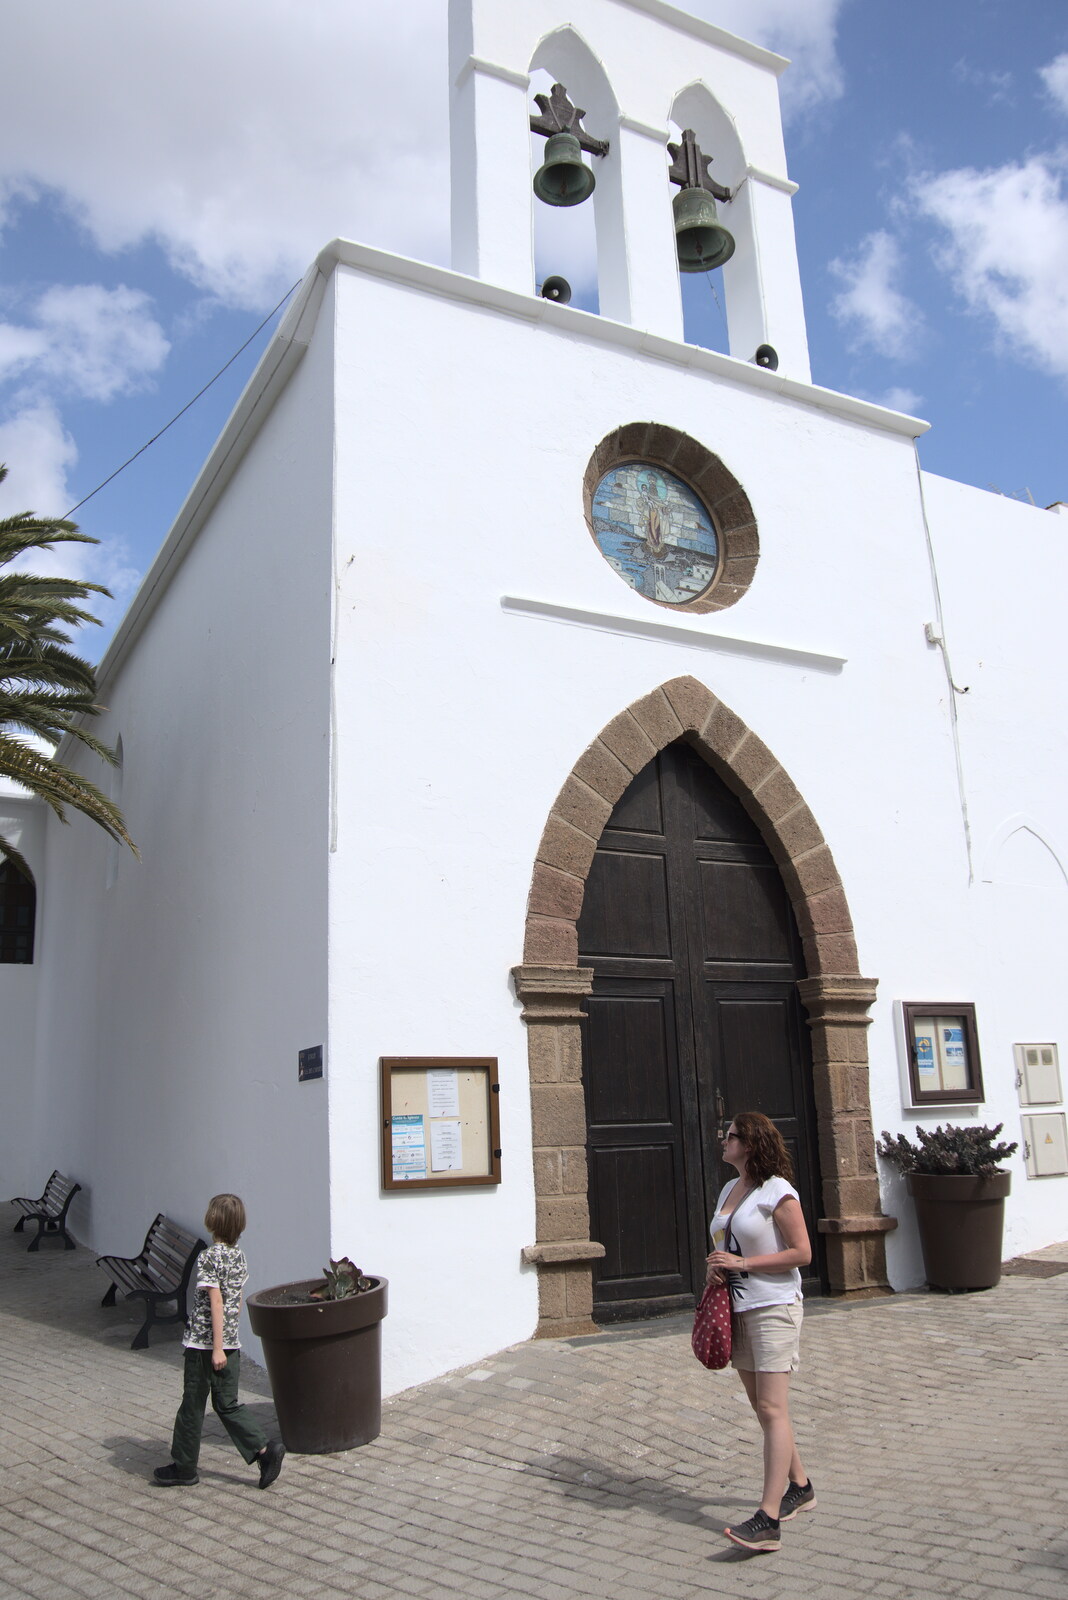 Harry and Isobel in front of an old church from Five Days in Lanzarote, Canary Islands, Spain - 24th October 2021